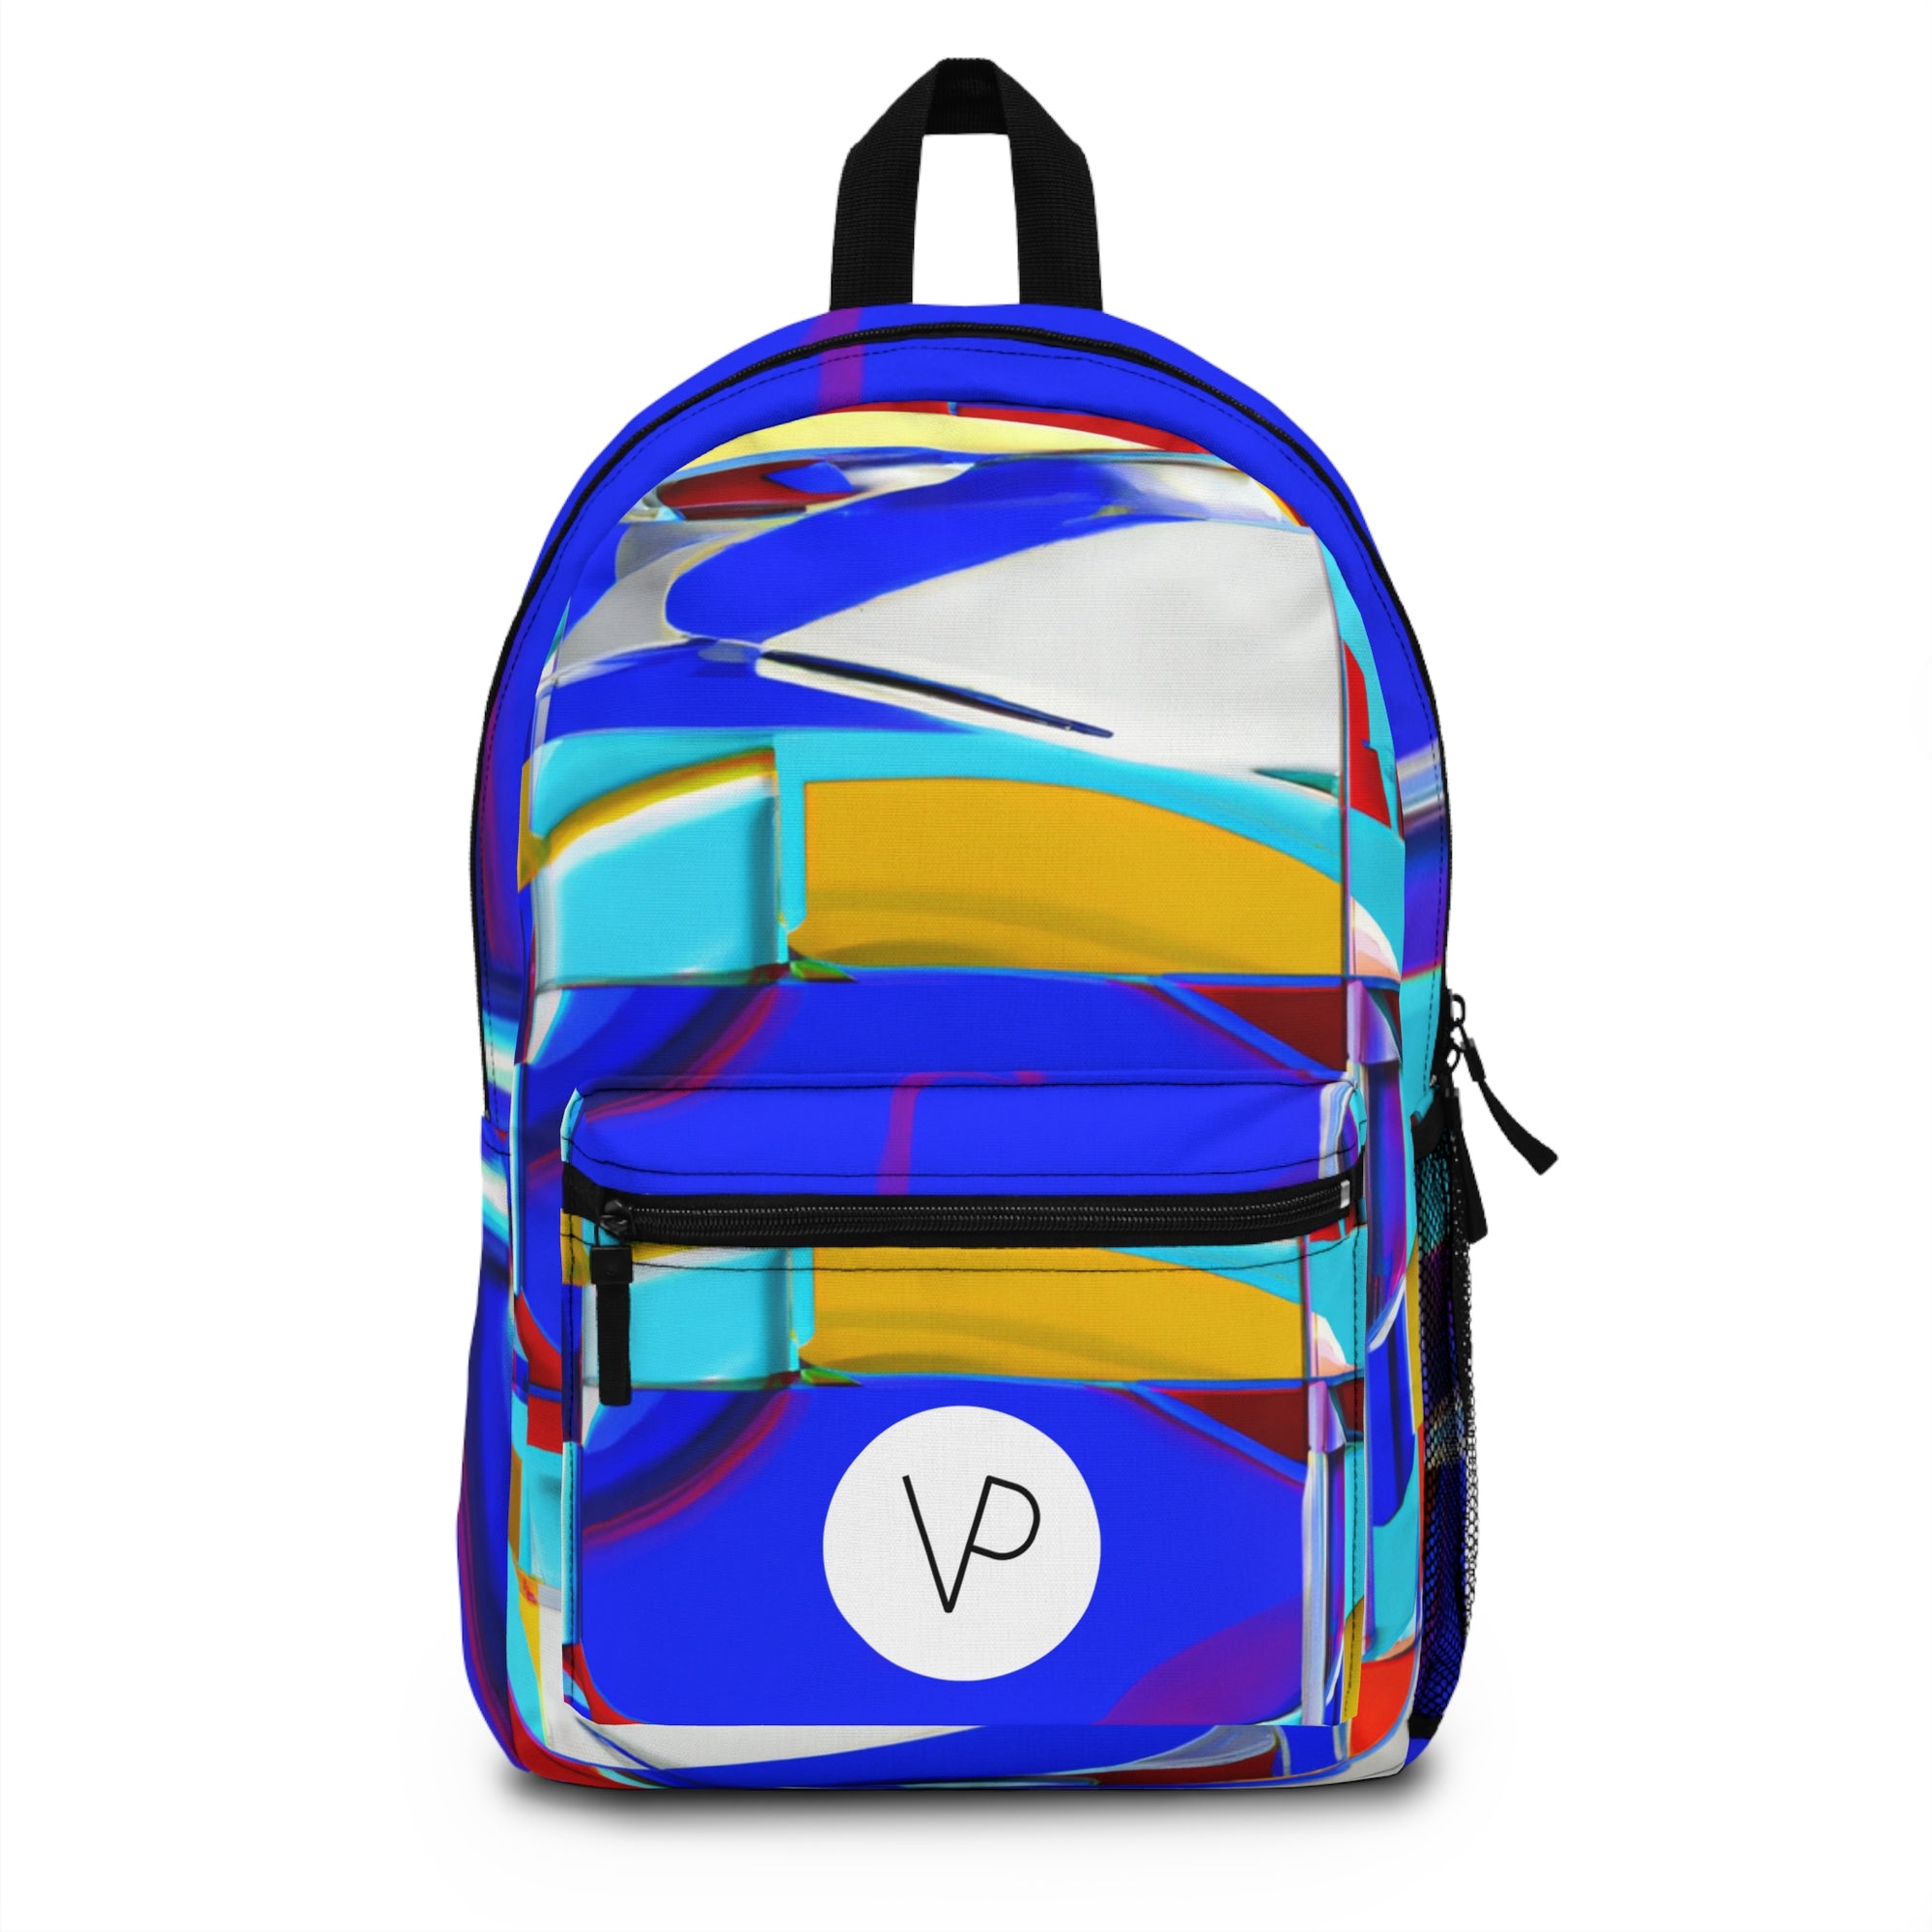 "Find Your Voice"-Backpack